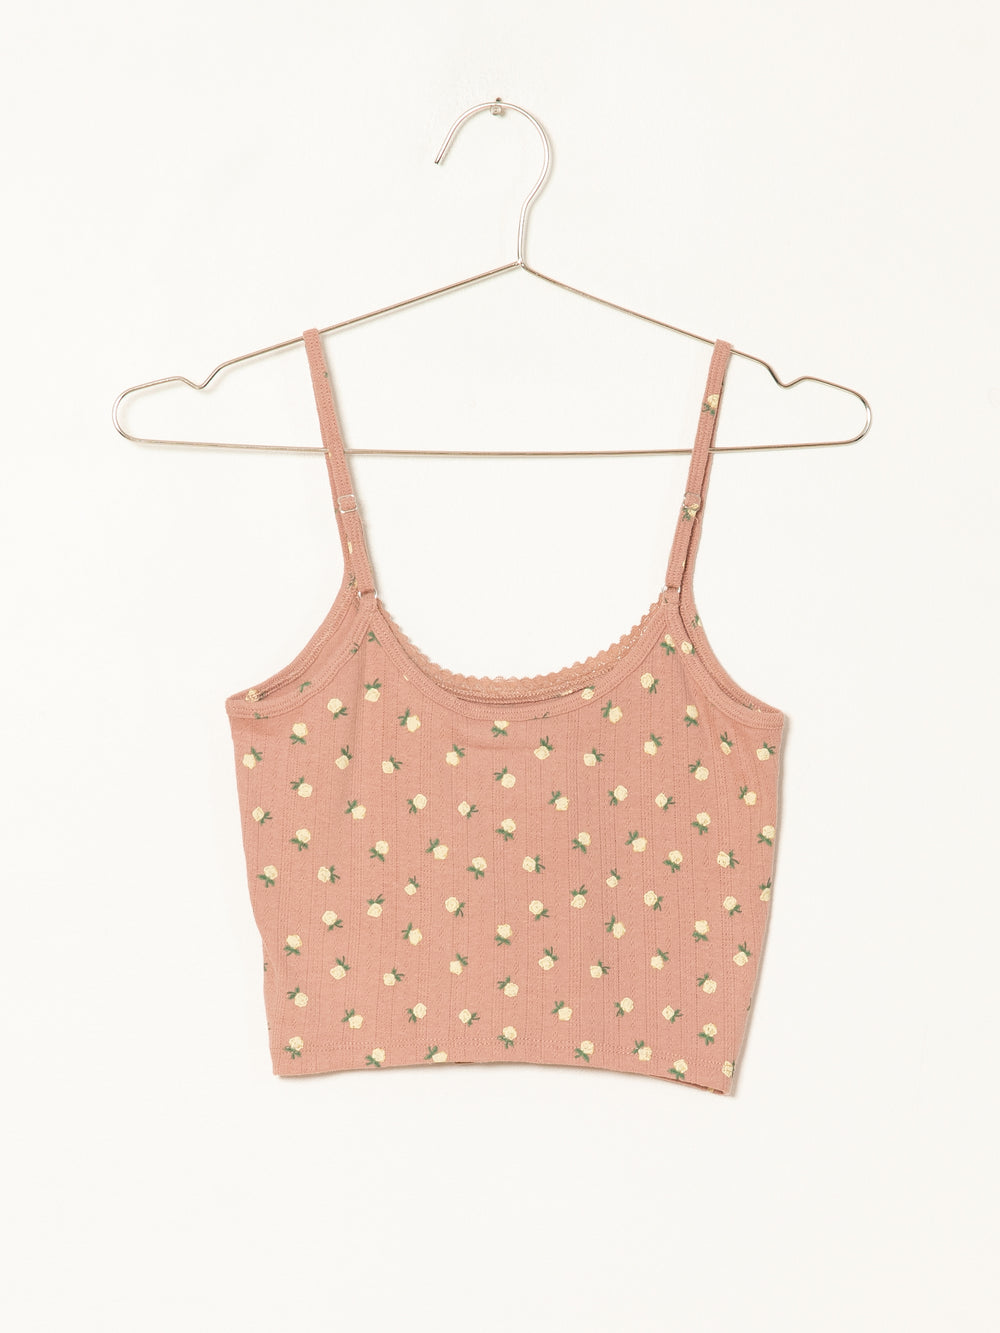 HARLOW KIKI POINTELLE DITSY Tank Top - CLEARANCE